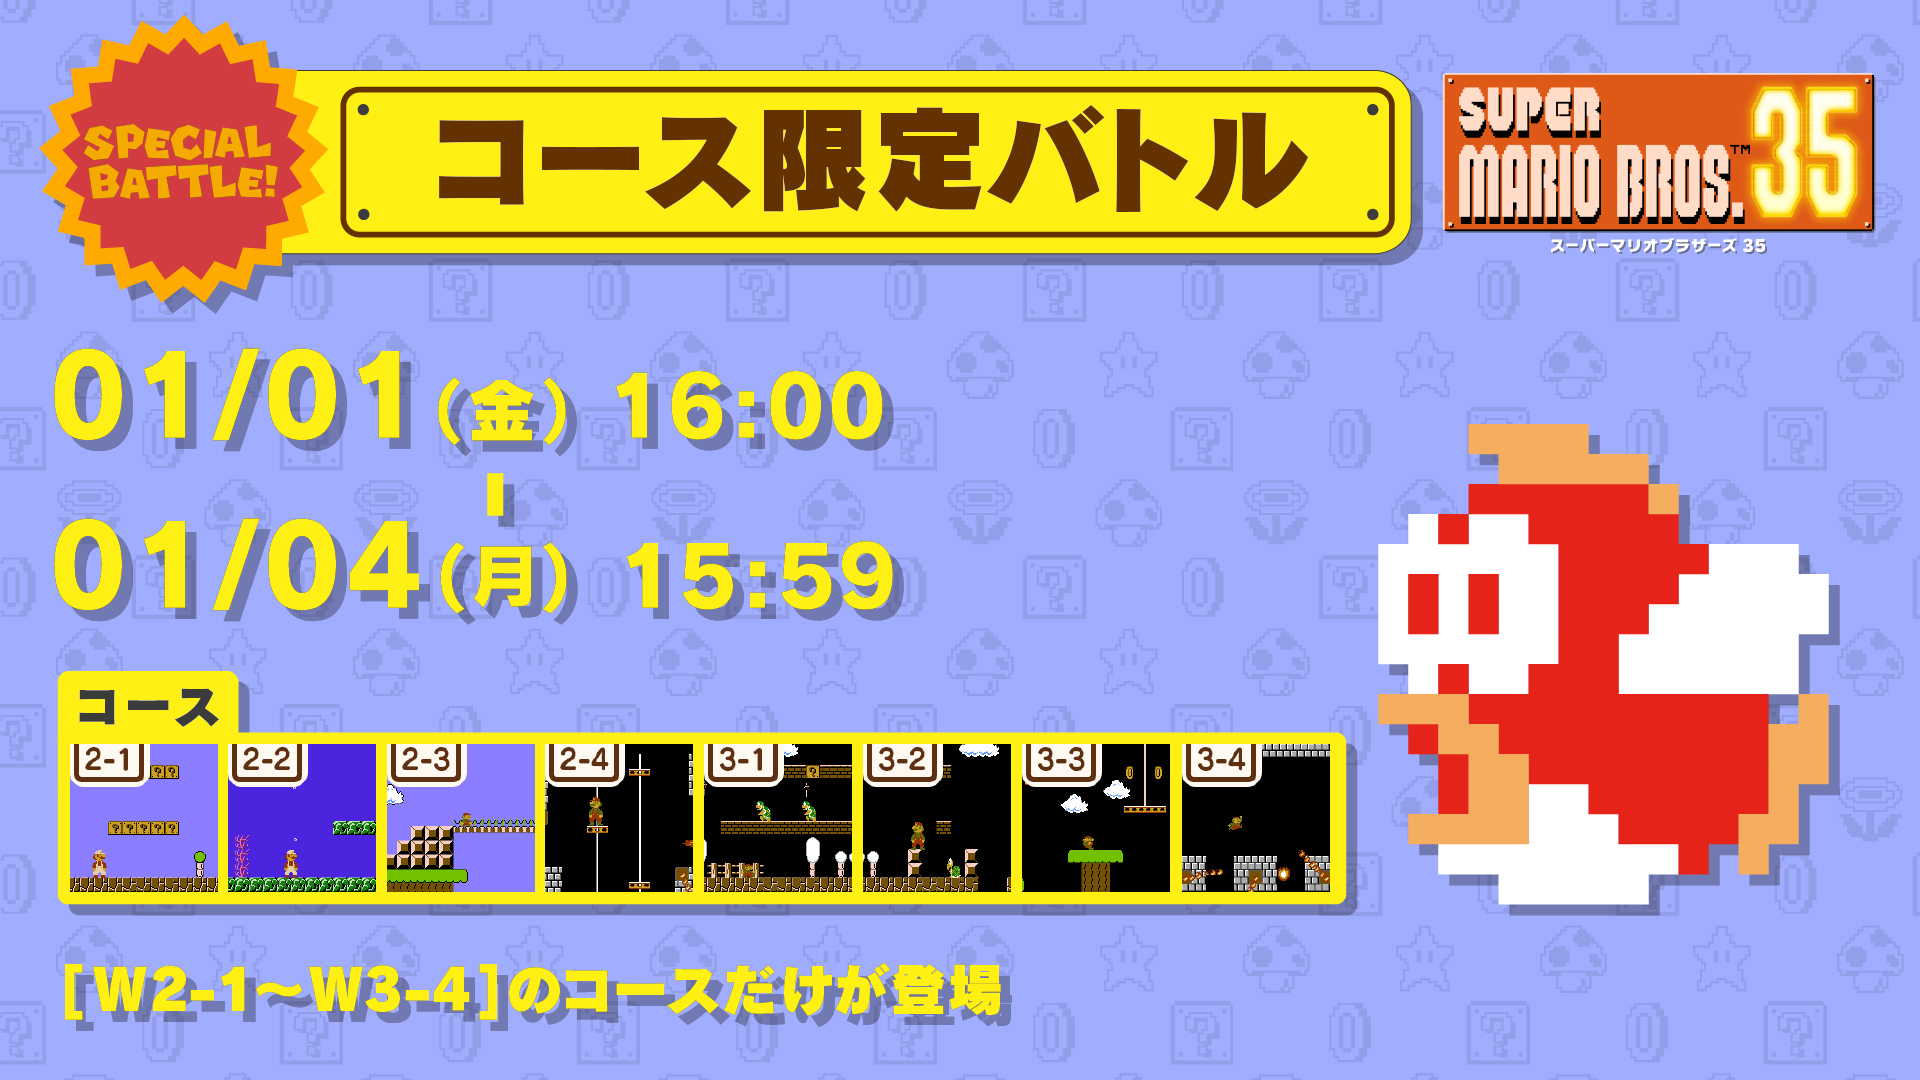 Super Mario Bros 35 New Special Battle Event Announced For January 1 Nintendo Everything